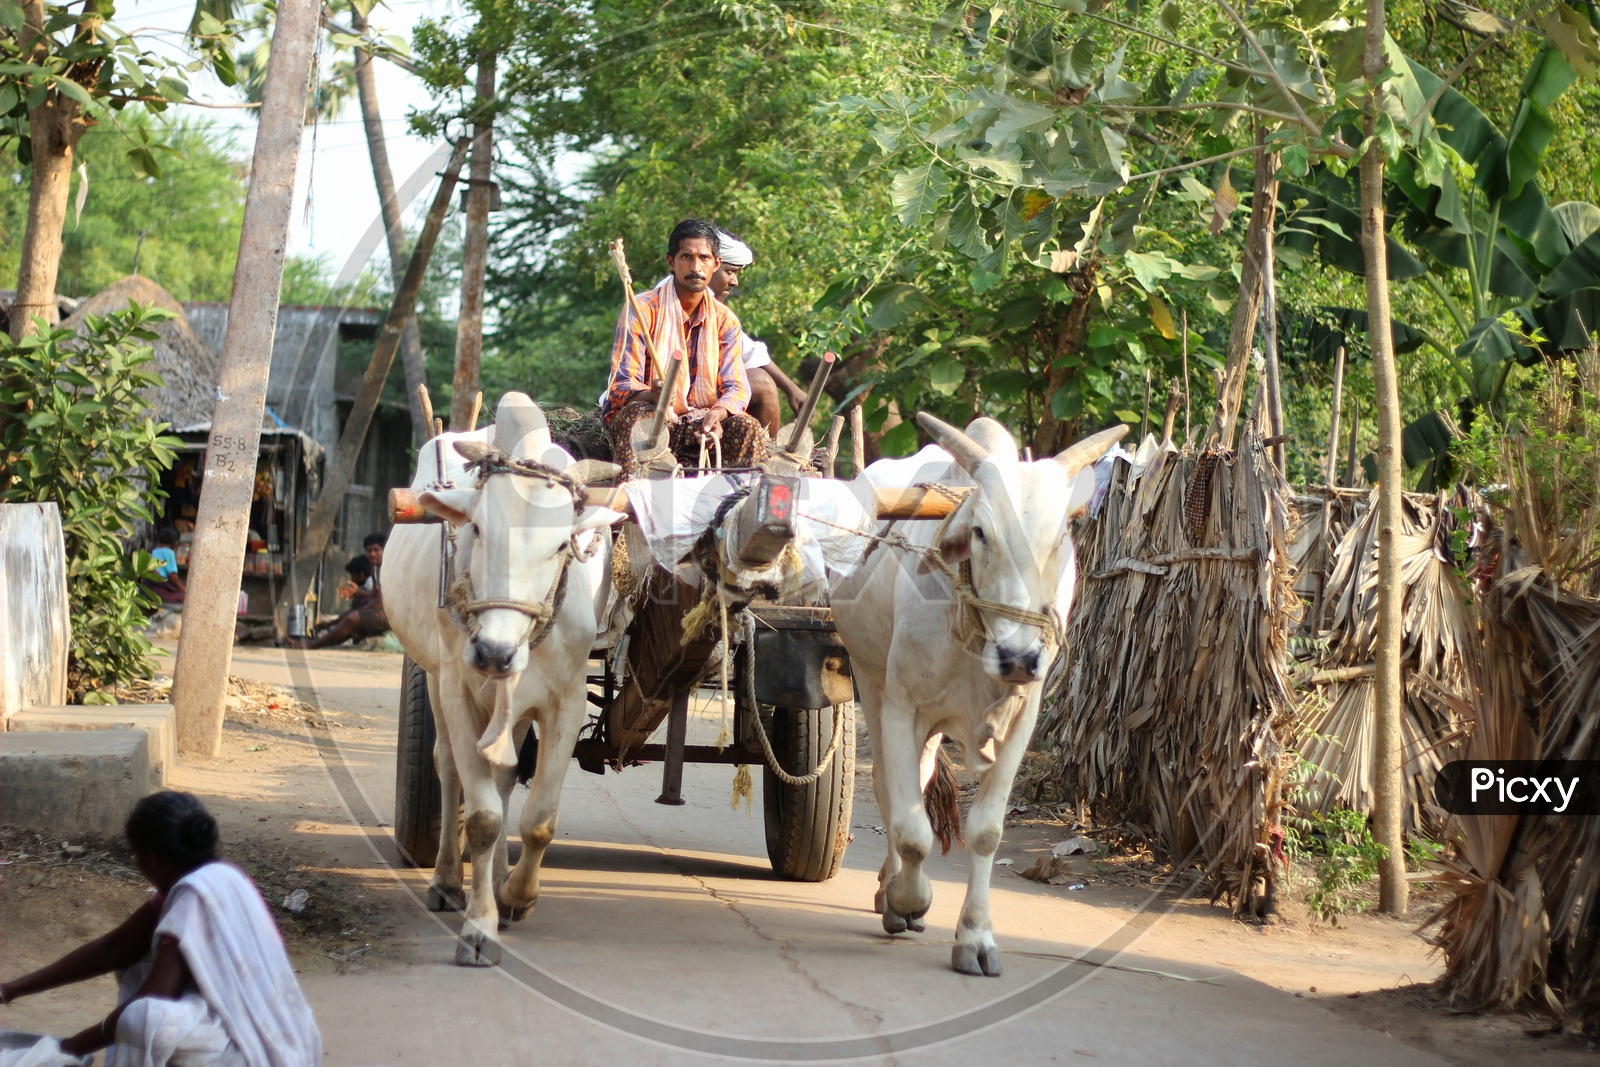 A Indian  man Riding a Bullock Cart On Streets in Villages Of Andhra Pradesh